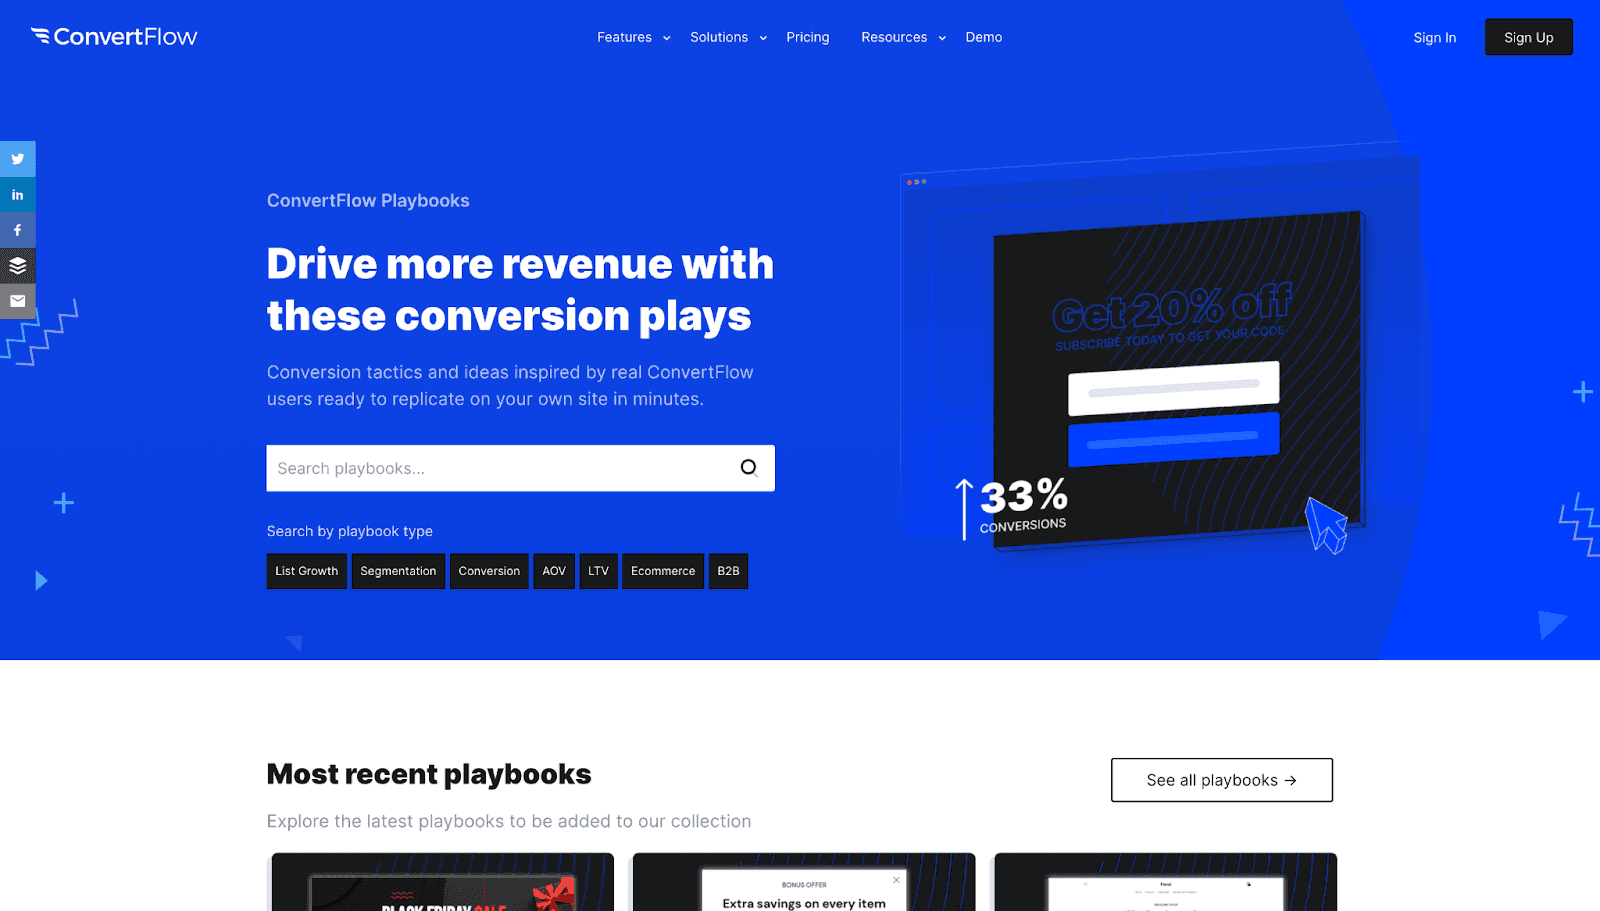 View playbooks on Convertflow.